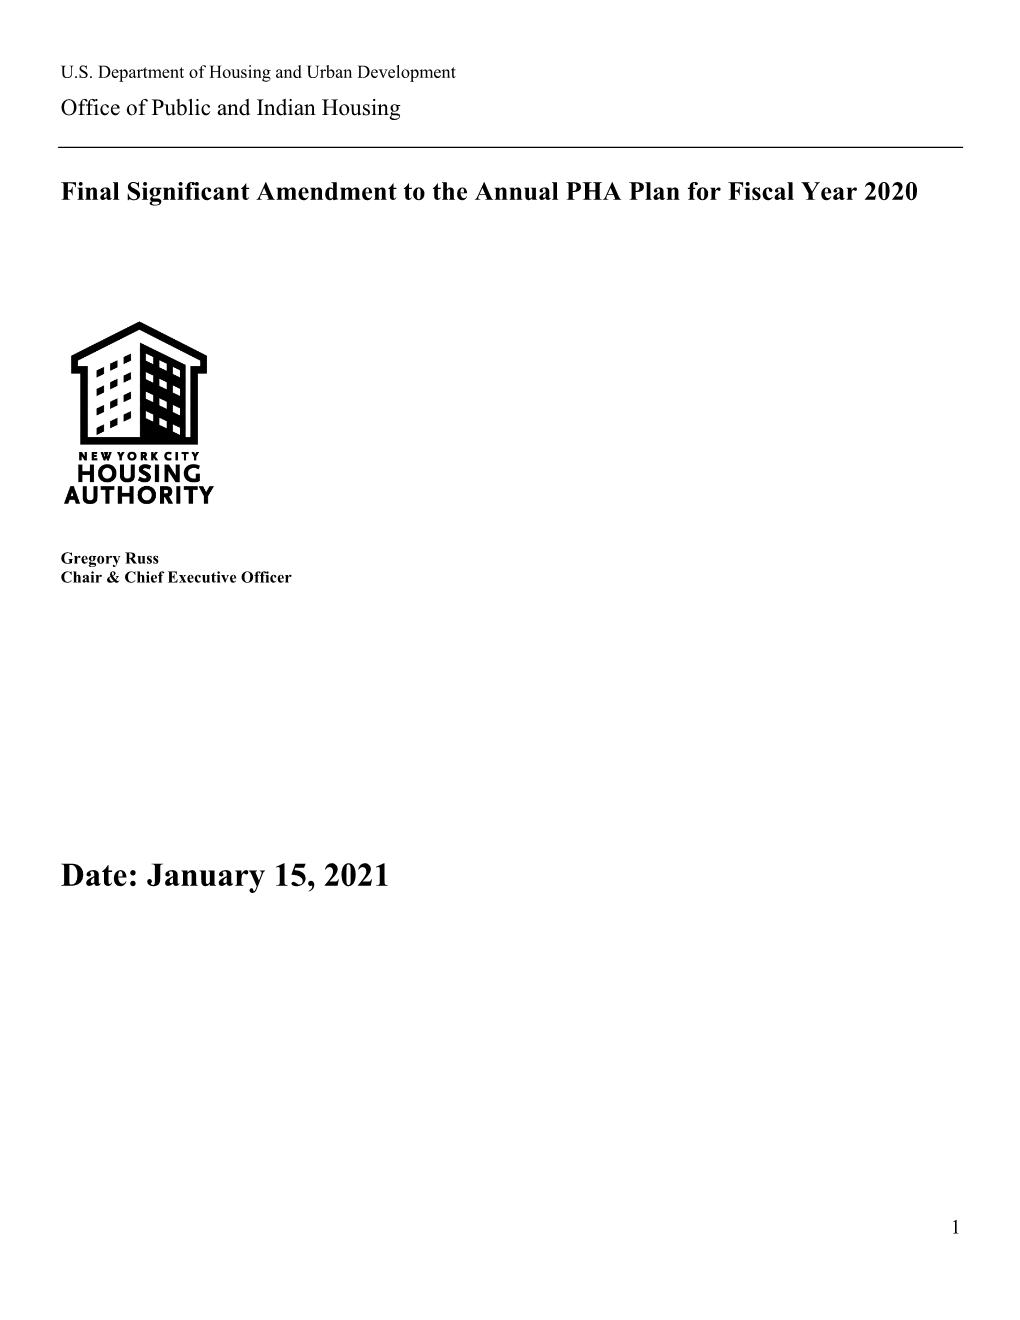 Final Significant Amendment to the FY 2020 Annual Plan